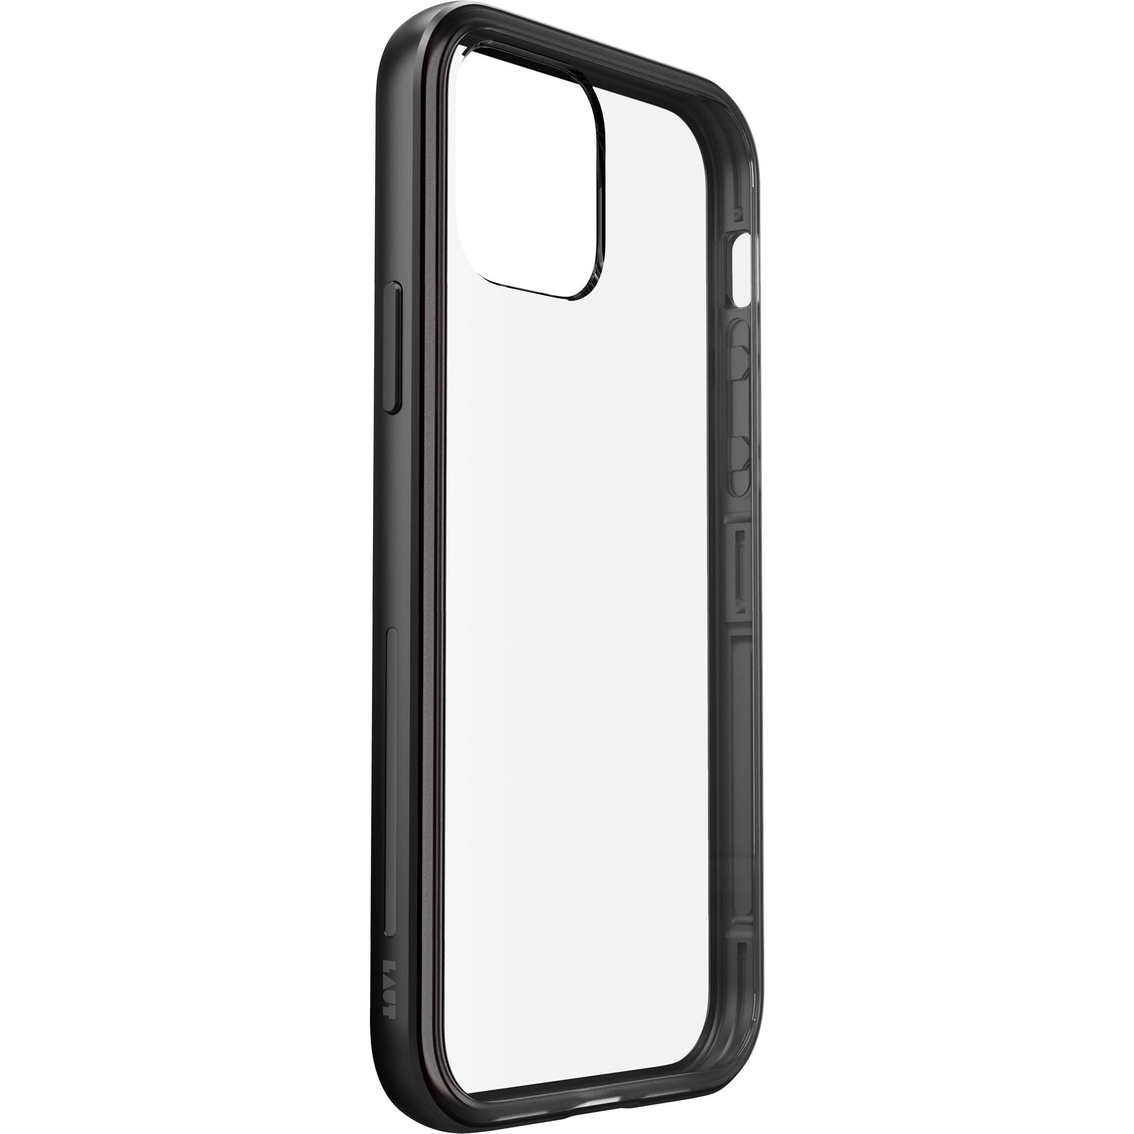 LAUT Design USA Exoframe Case for iPhone 12 Pro Max - Image 1 of 5